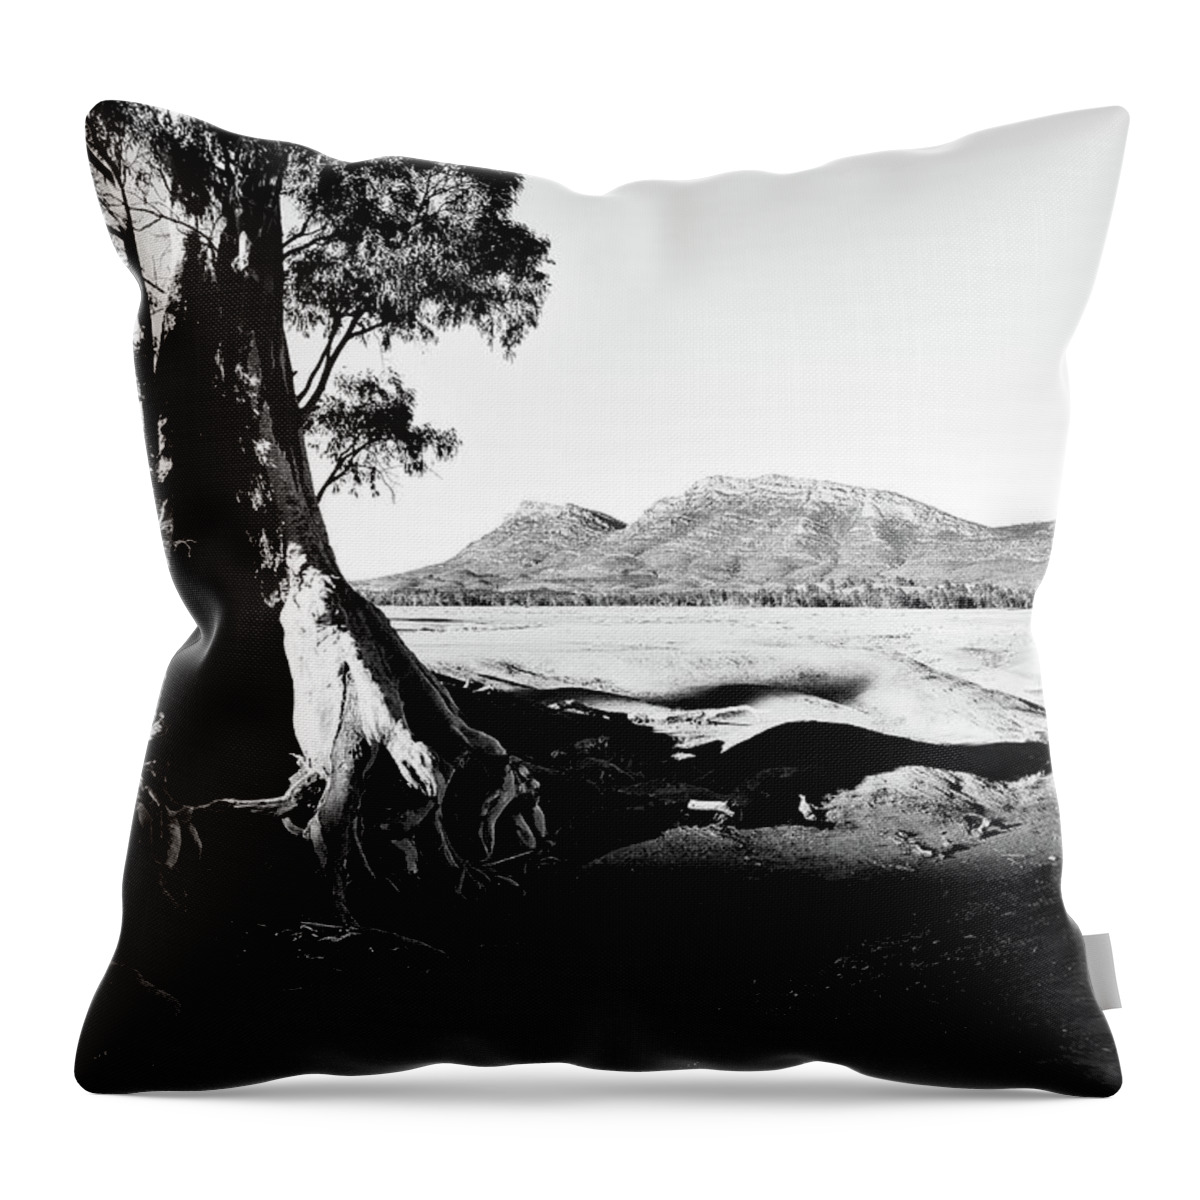 Cazneaux Tree Throw Pillow featuring the photograph Sunrise - Cazneaux Tree BW by Lexa Harpell